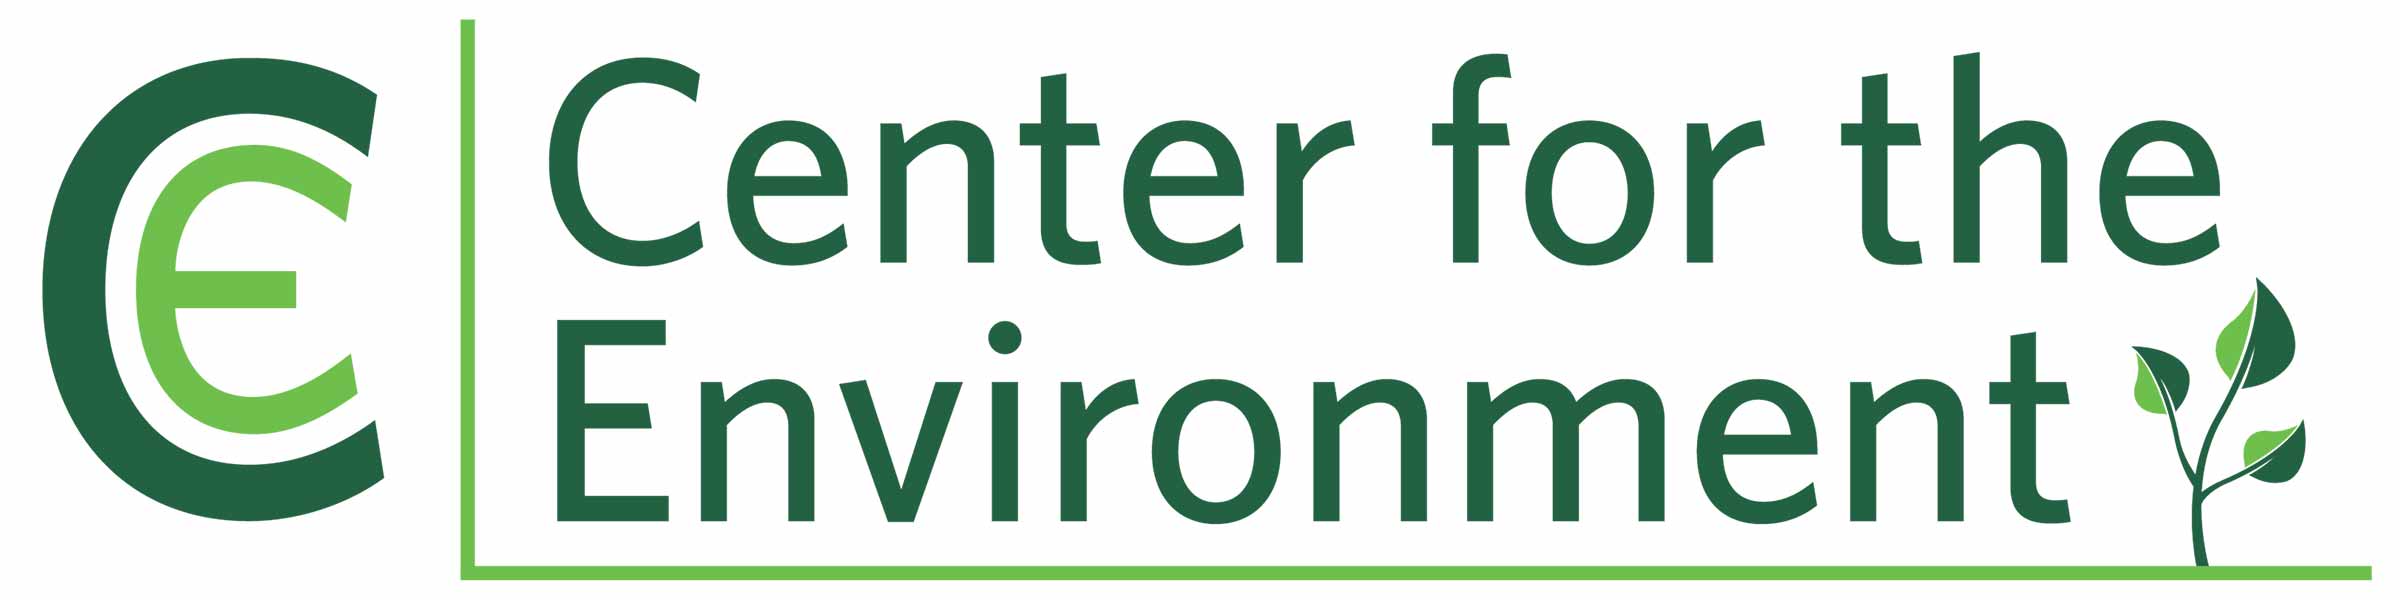 Center for the Environment